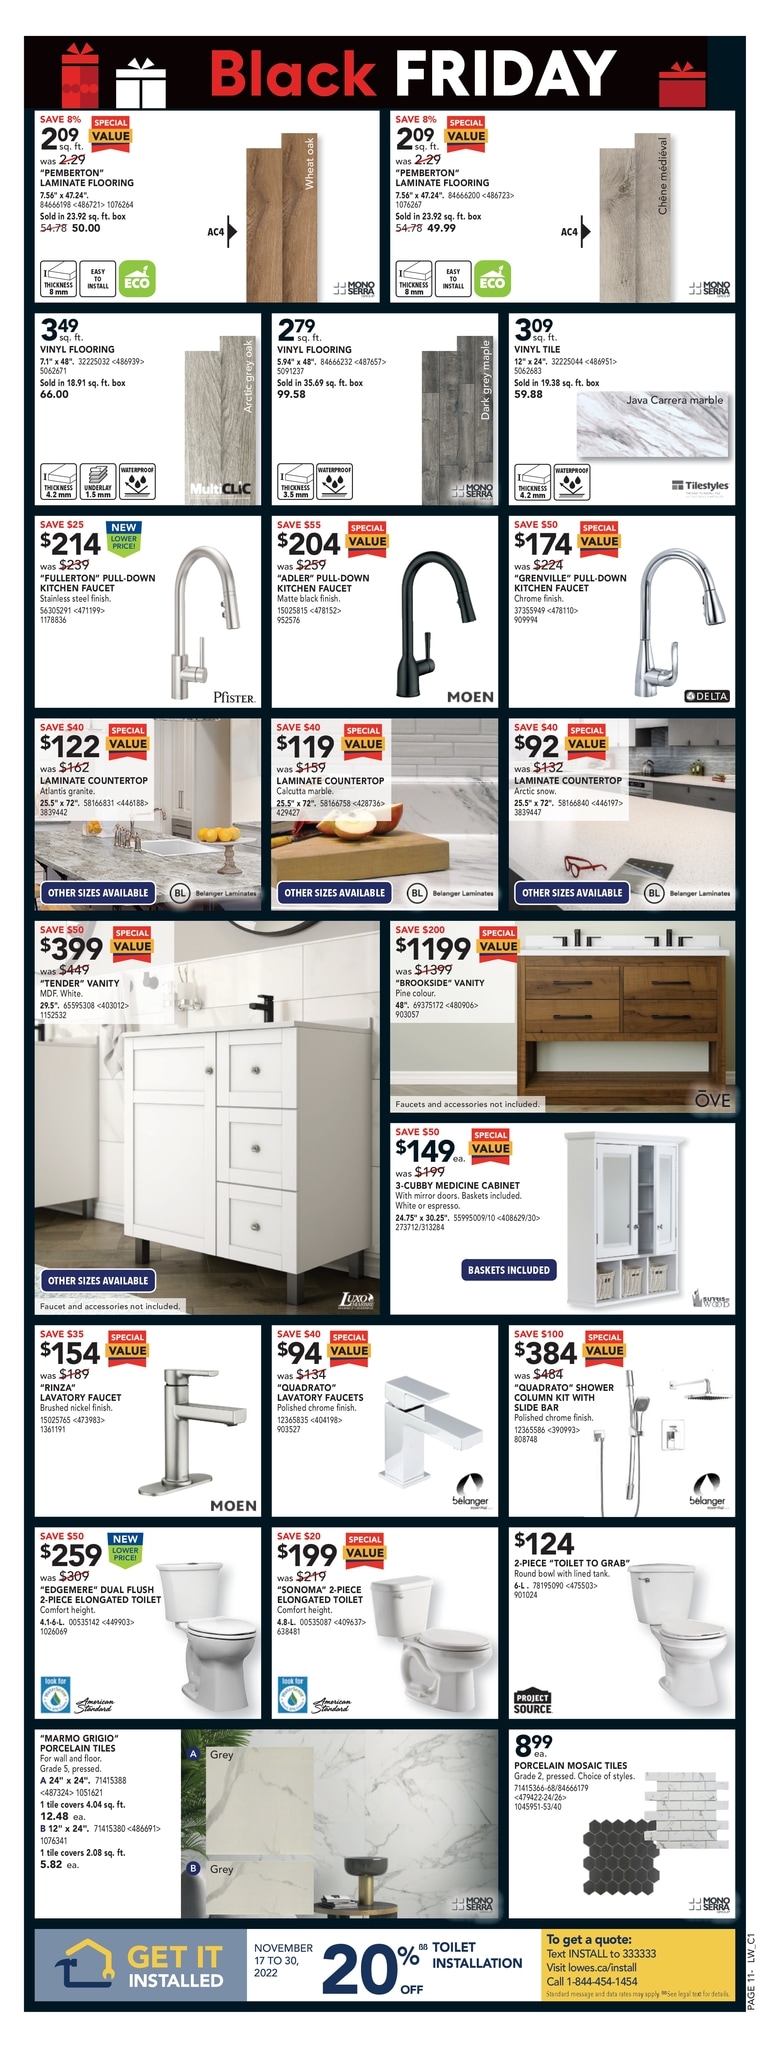 LOWE'S - Weekly Flyer Specials - Black Friday - Page 17